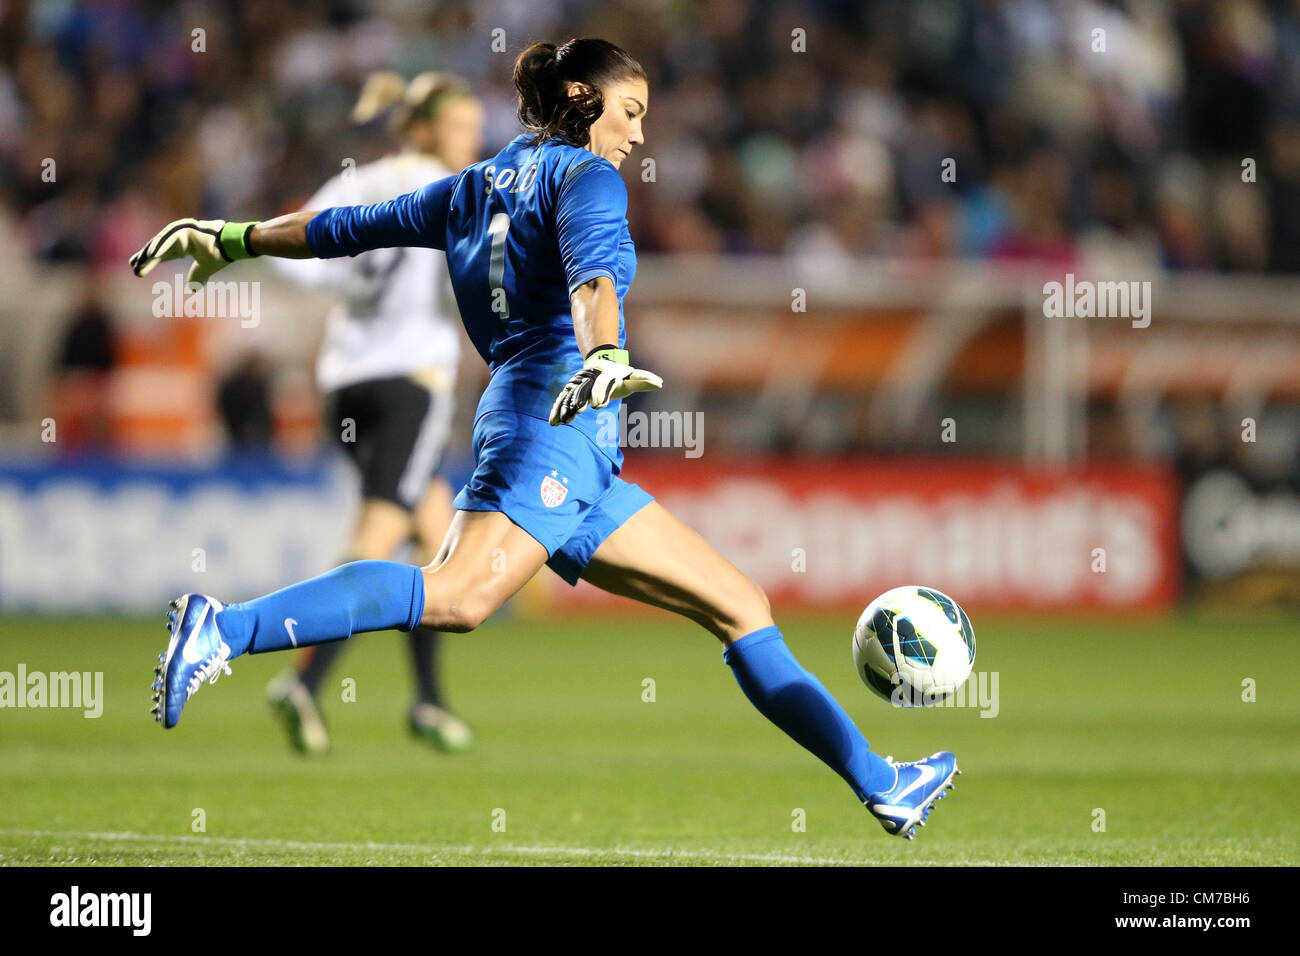 20.10.2012. Chicago, USA.  Hope Solo (USA). The United States Women's National Team played the Germany Women's National Team at Toyota Park in Bridgeview, Illinois in a women's international friendly soccer match. The game ended in a 1-1 tie. Stock Photo